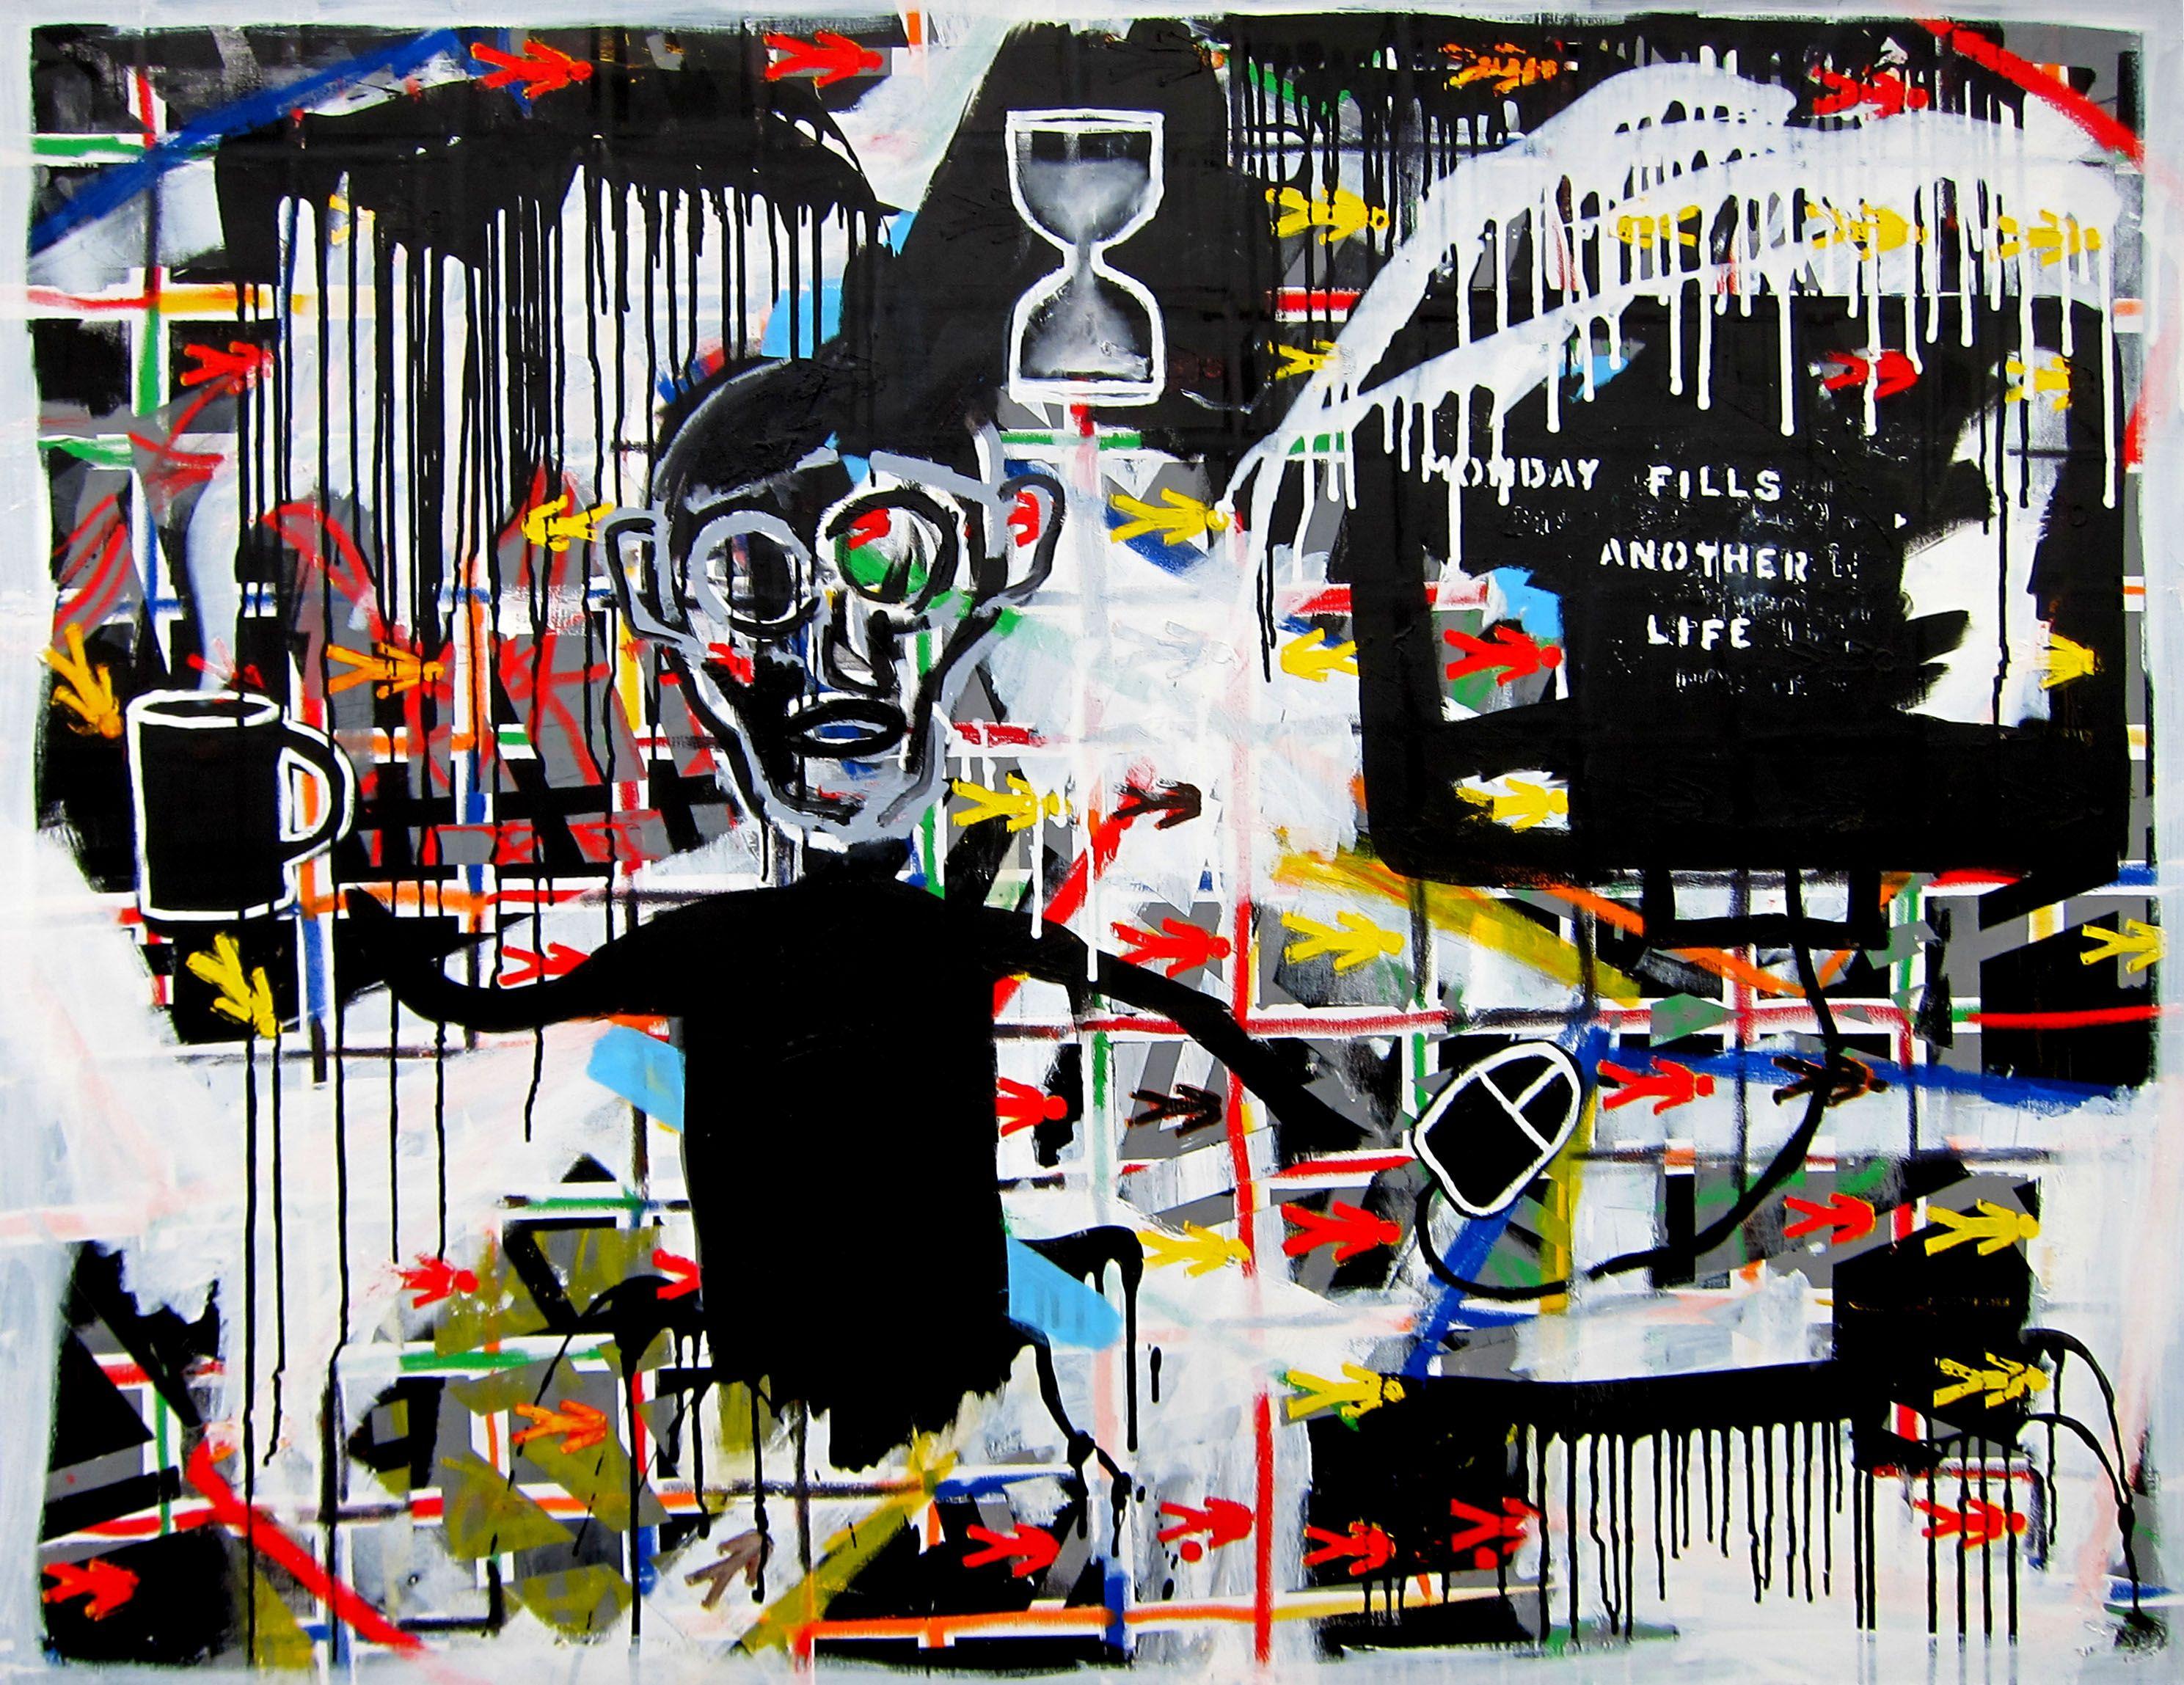 Tuned In/Tuned Out, Mixed Media on Canvas - Mixed Media Art by Cameron Holmes